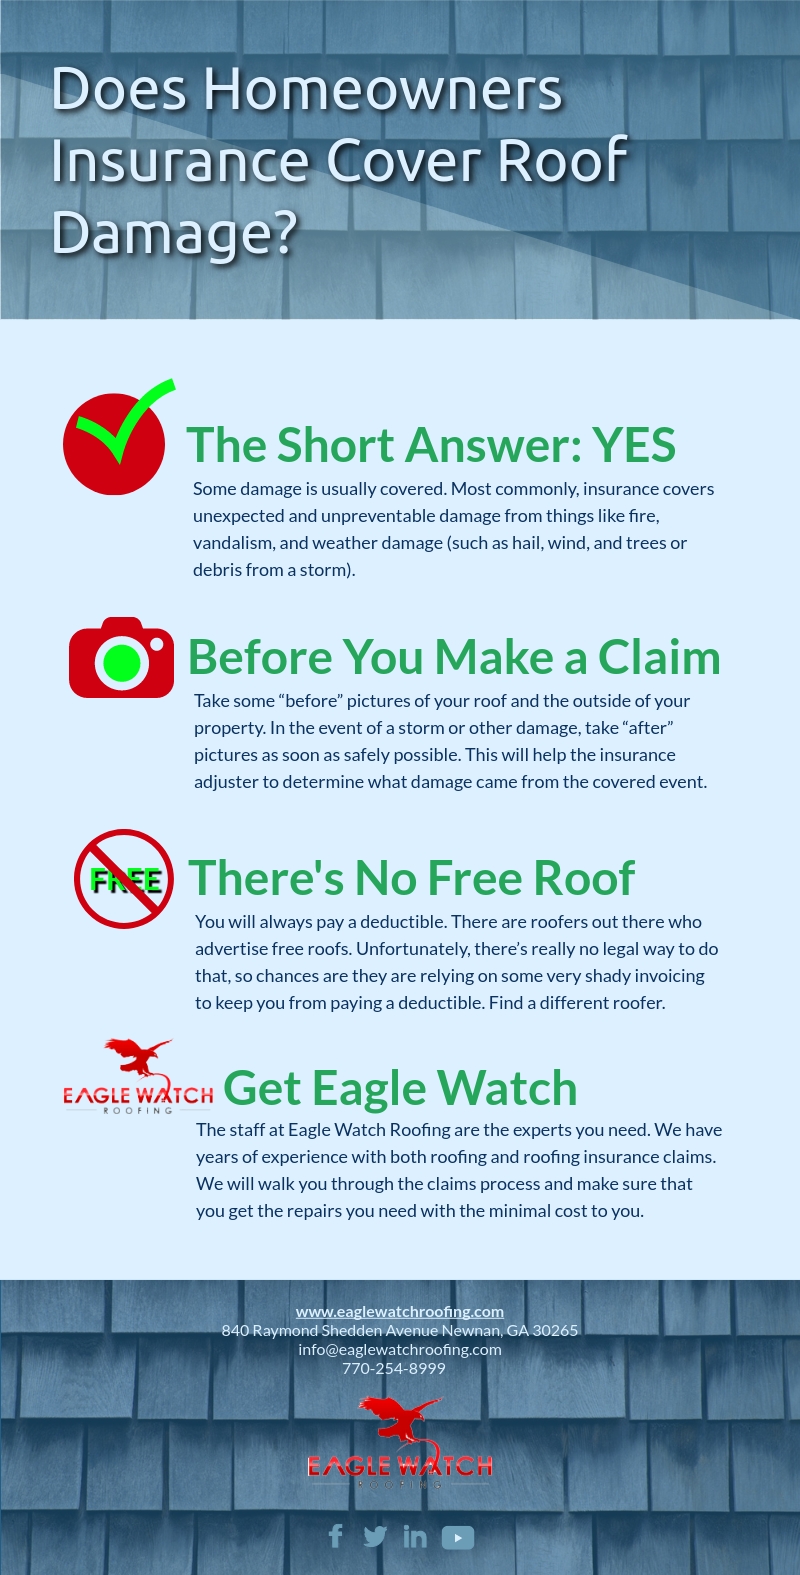 Does Homeowners Insurance Cover Roof Damage infographic 2